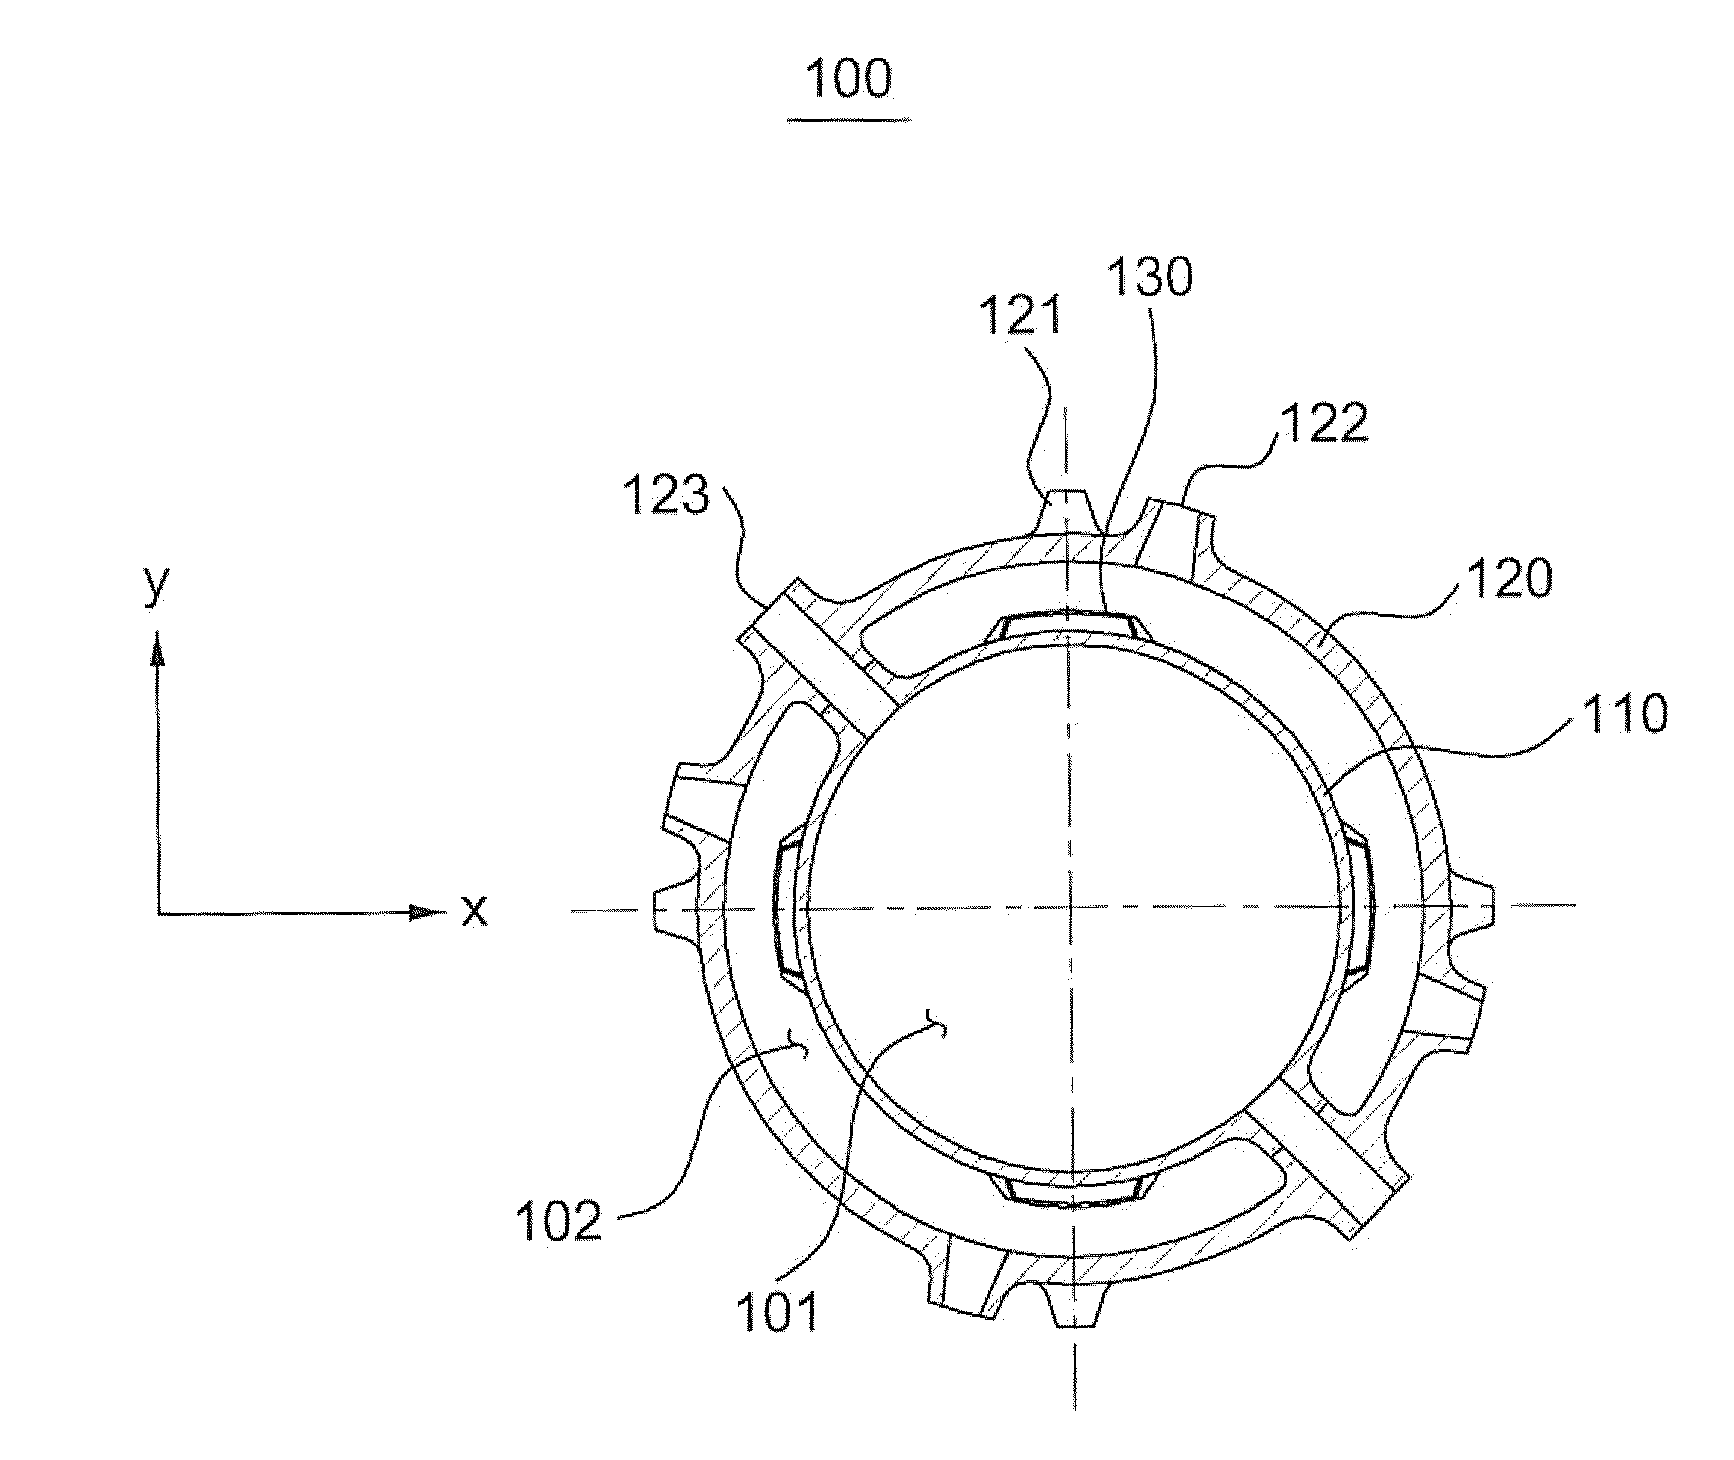 Emergency core cooling duct for emergency core cooling water injection of a nuclear reactor